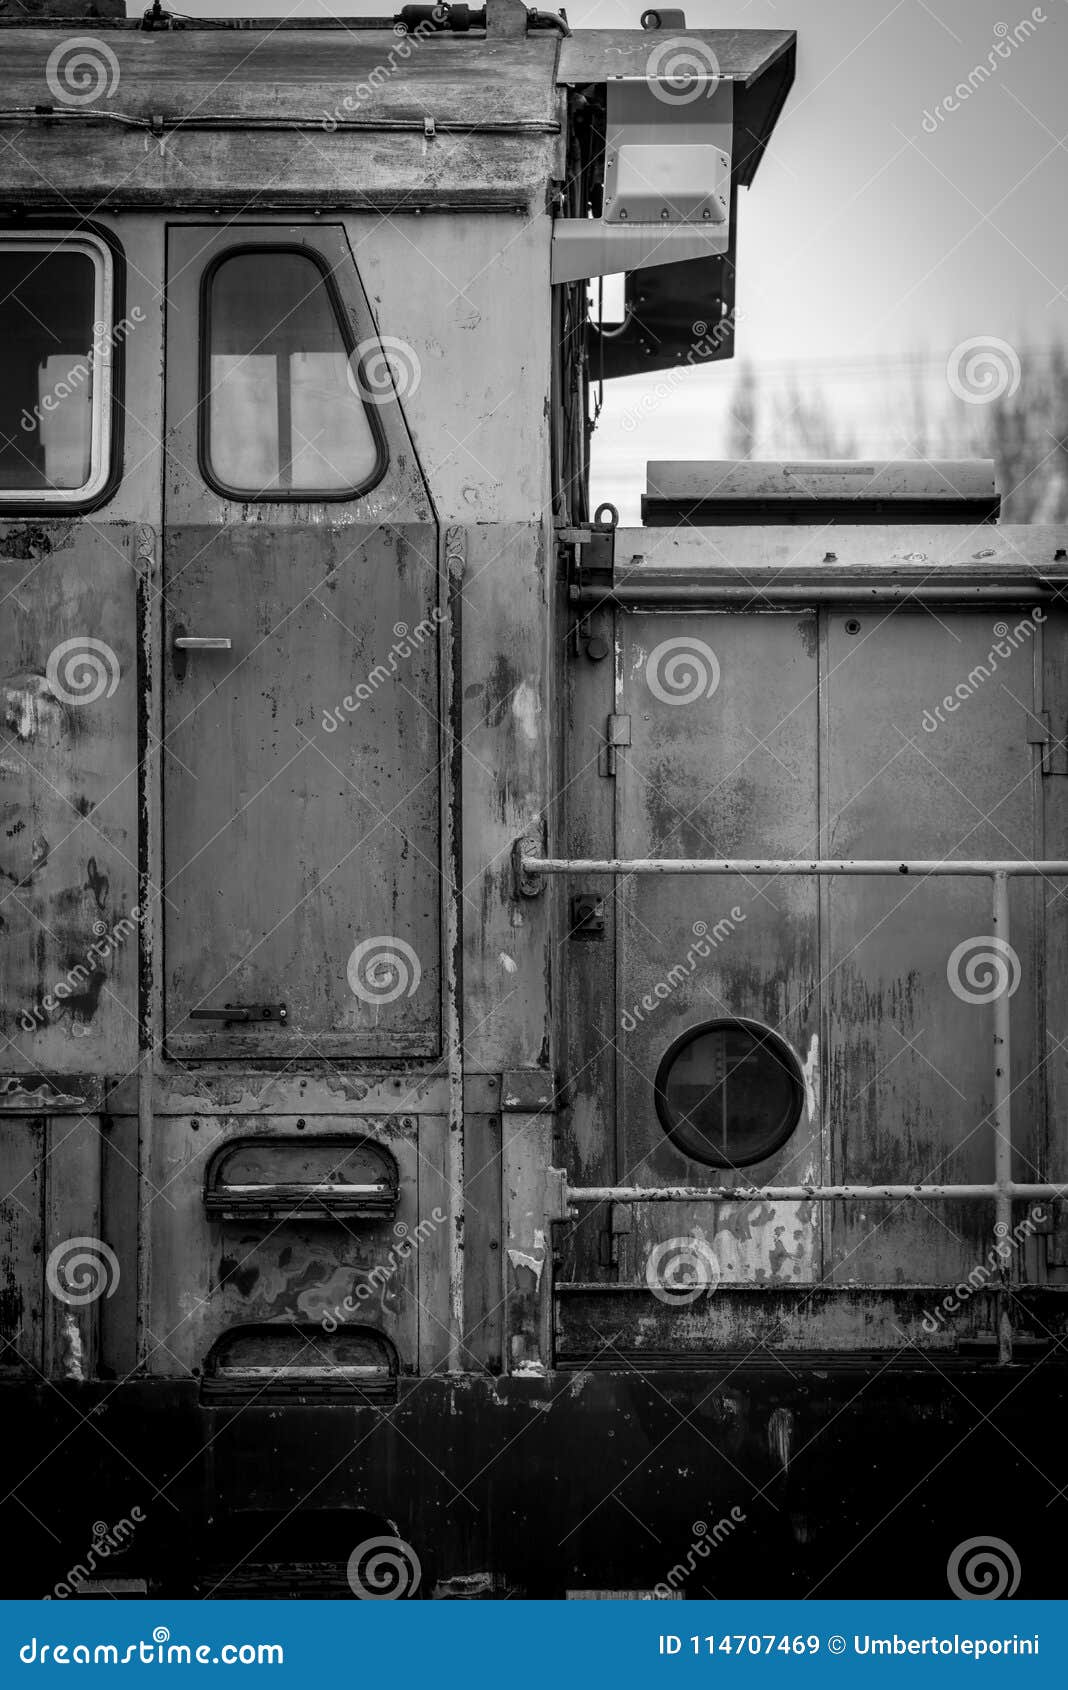 Old Train Black and White Image Stock Image - Image of train, panel ...